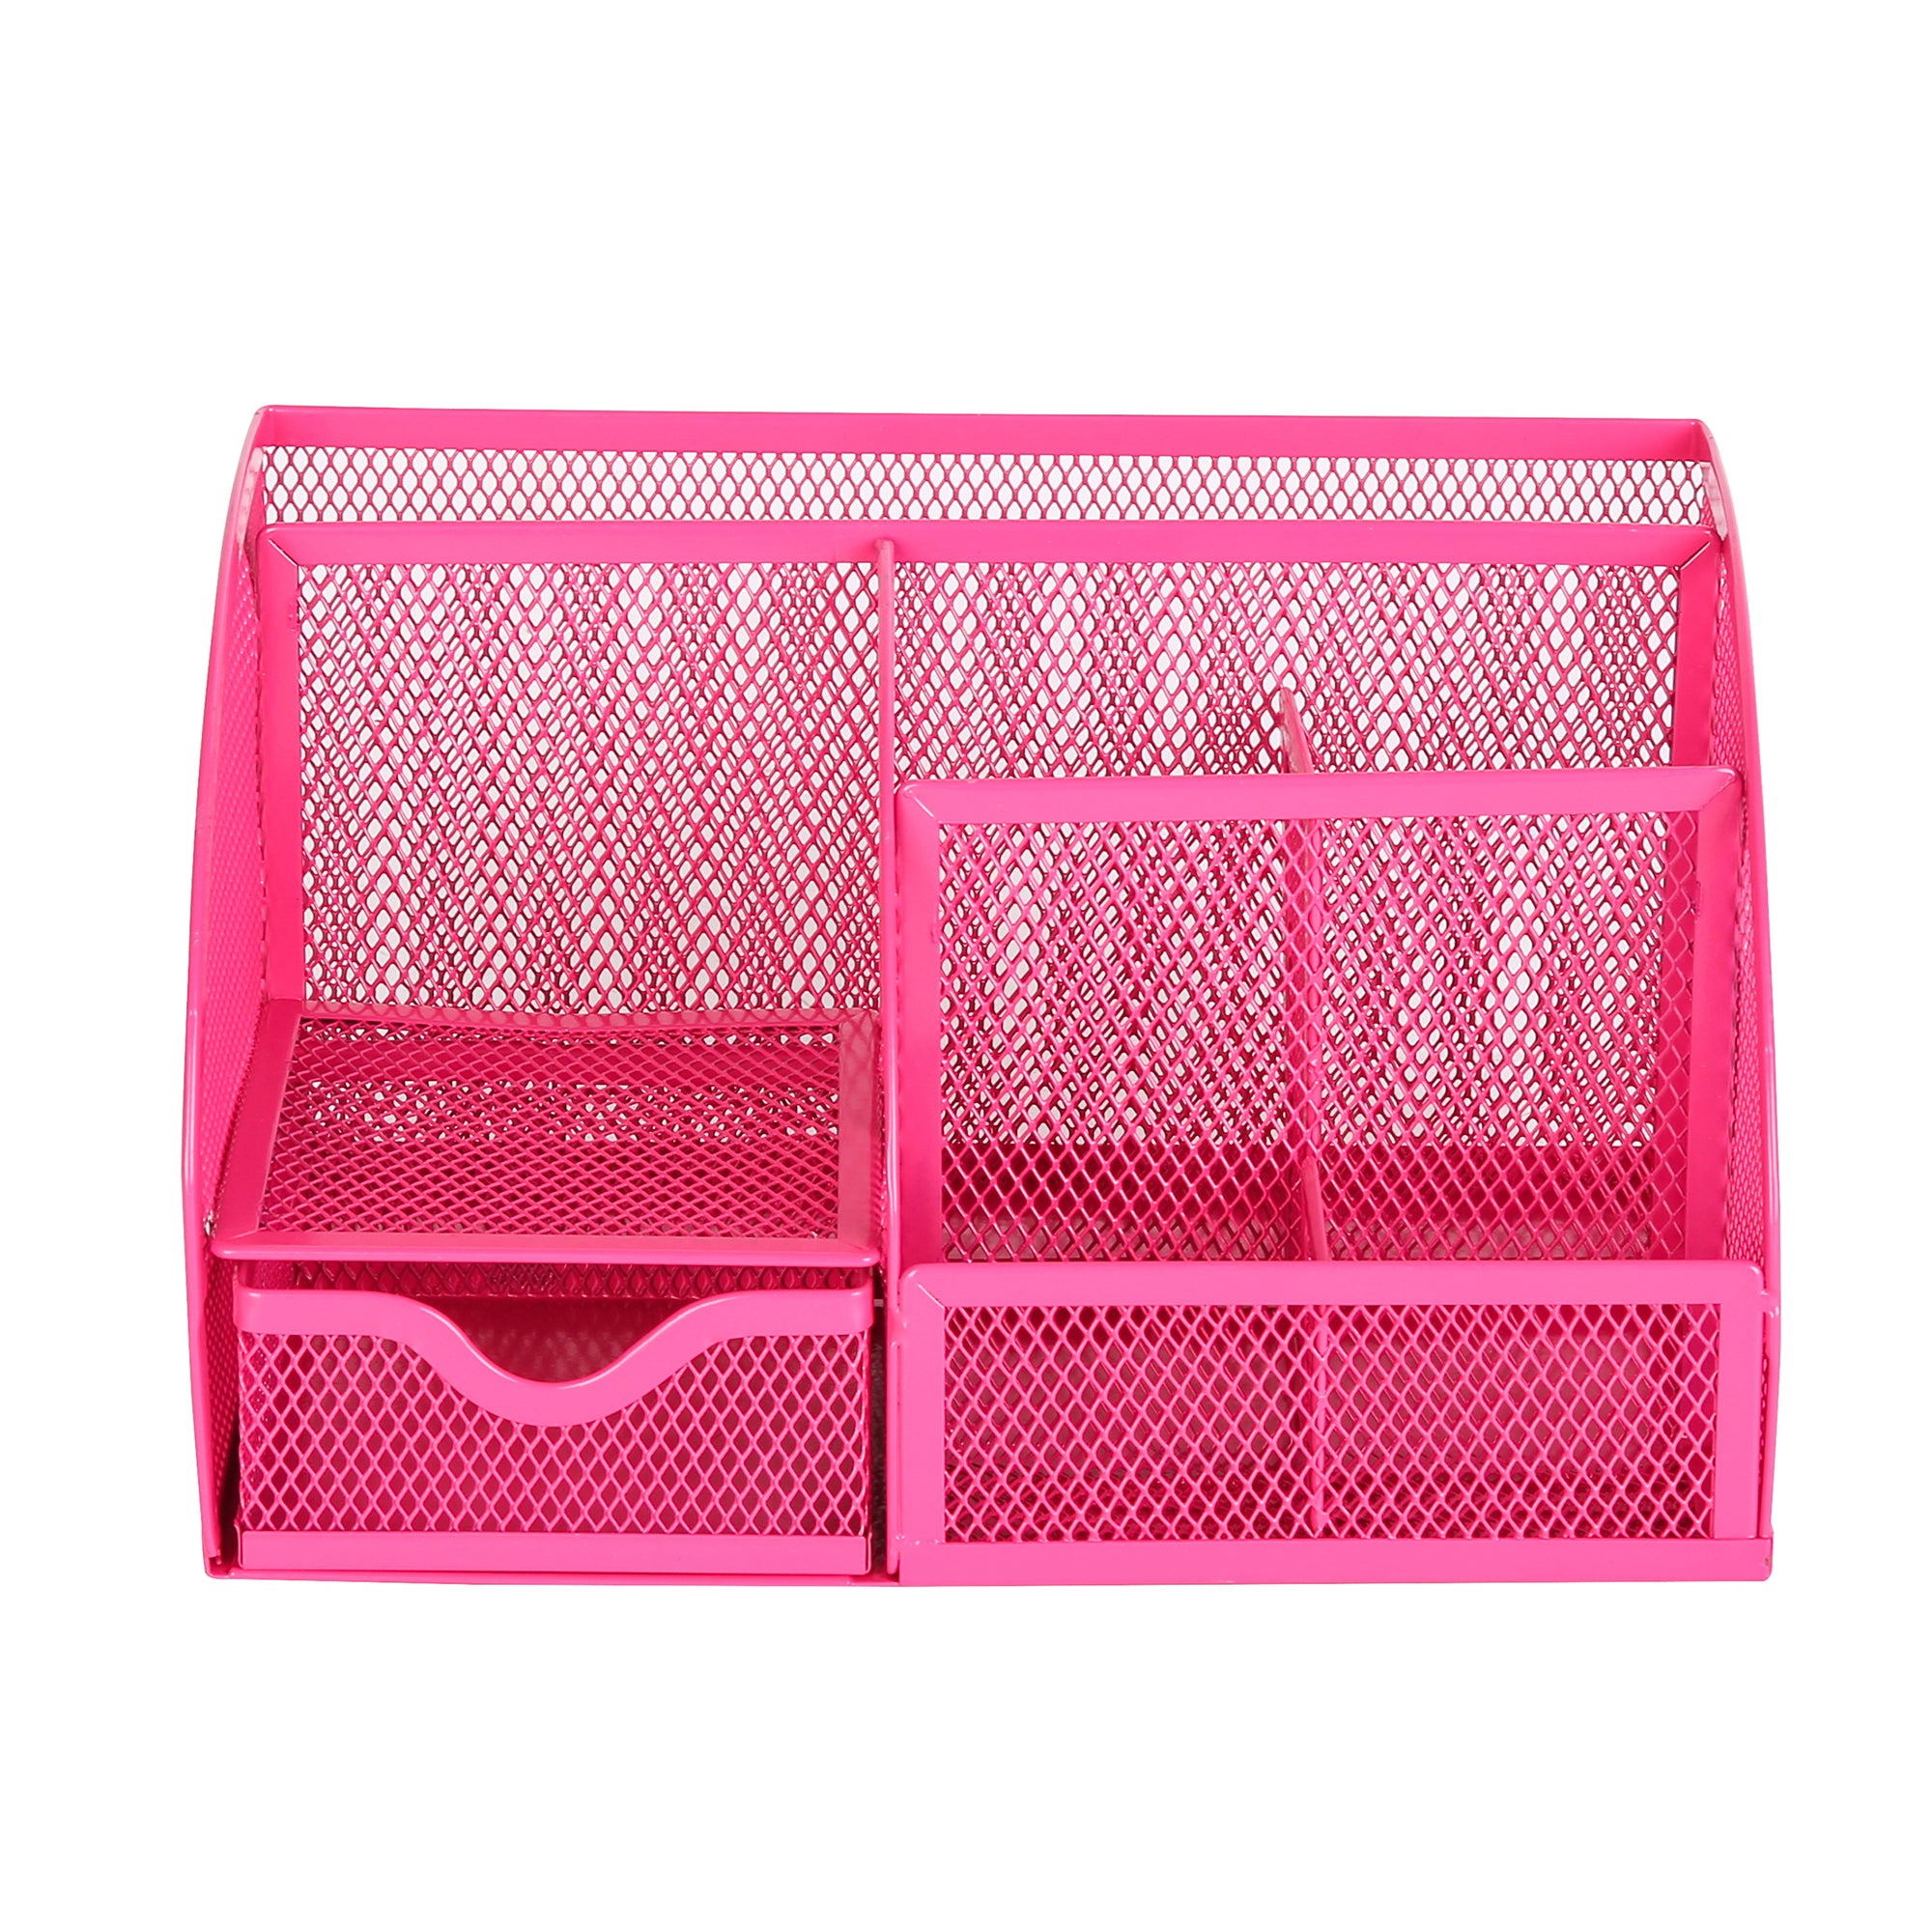 EXERZ Desk Organiser with 7 Compartments -Mesh Desk Tidy Caddy - Pink